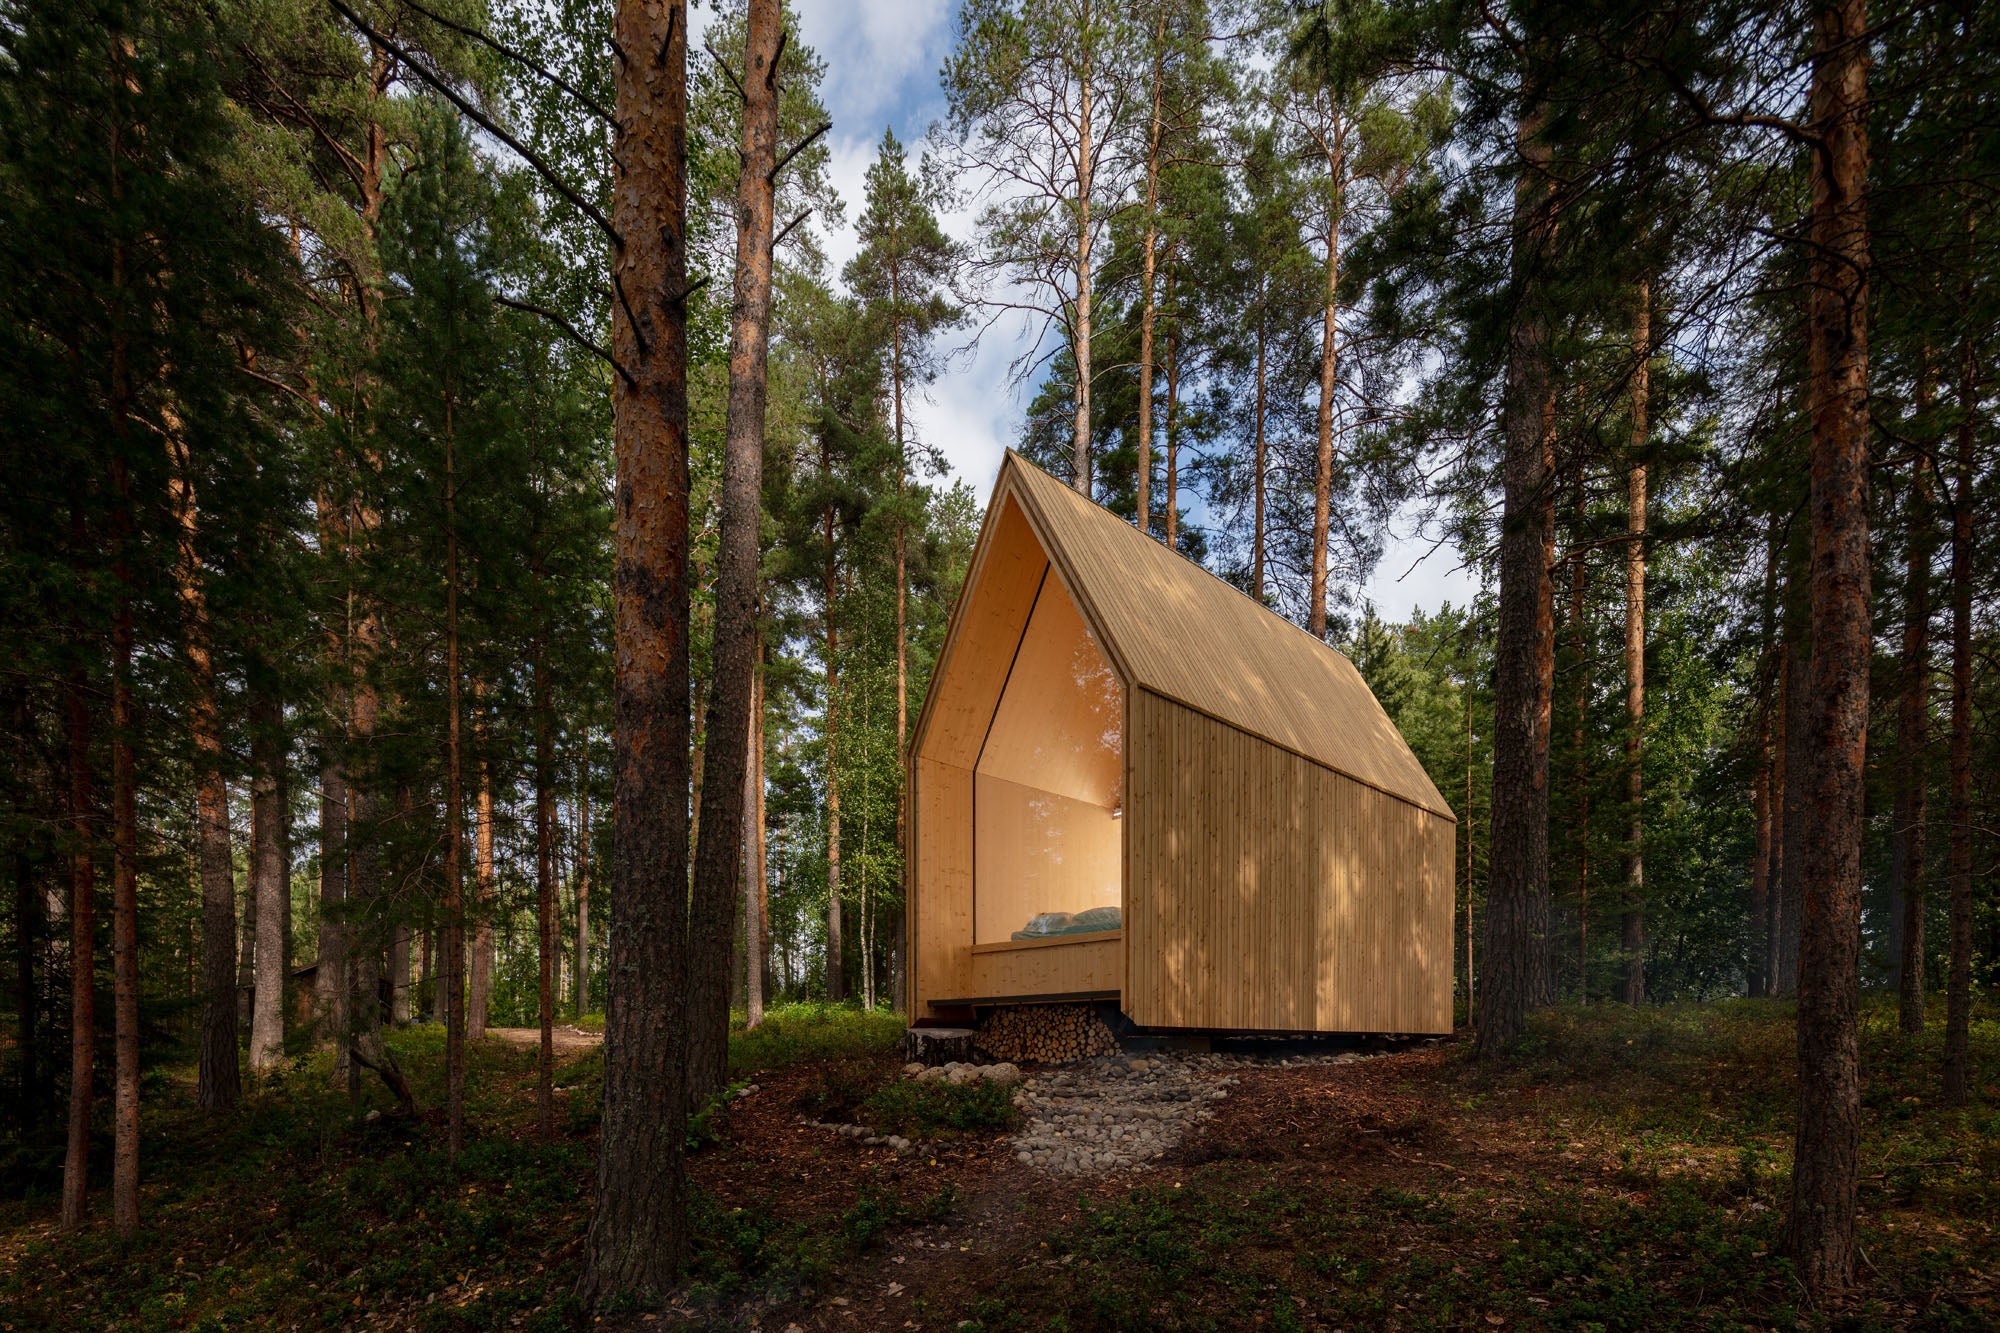 This Zen-Inspired Cozy Woodland Prefab Cabin Appeared Overnight